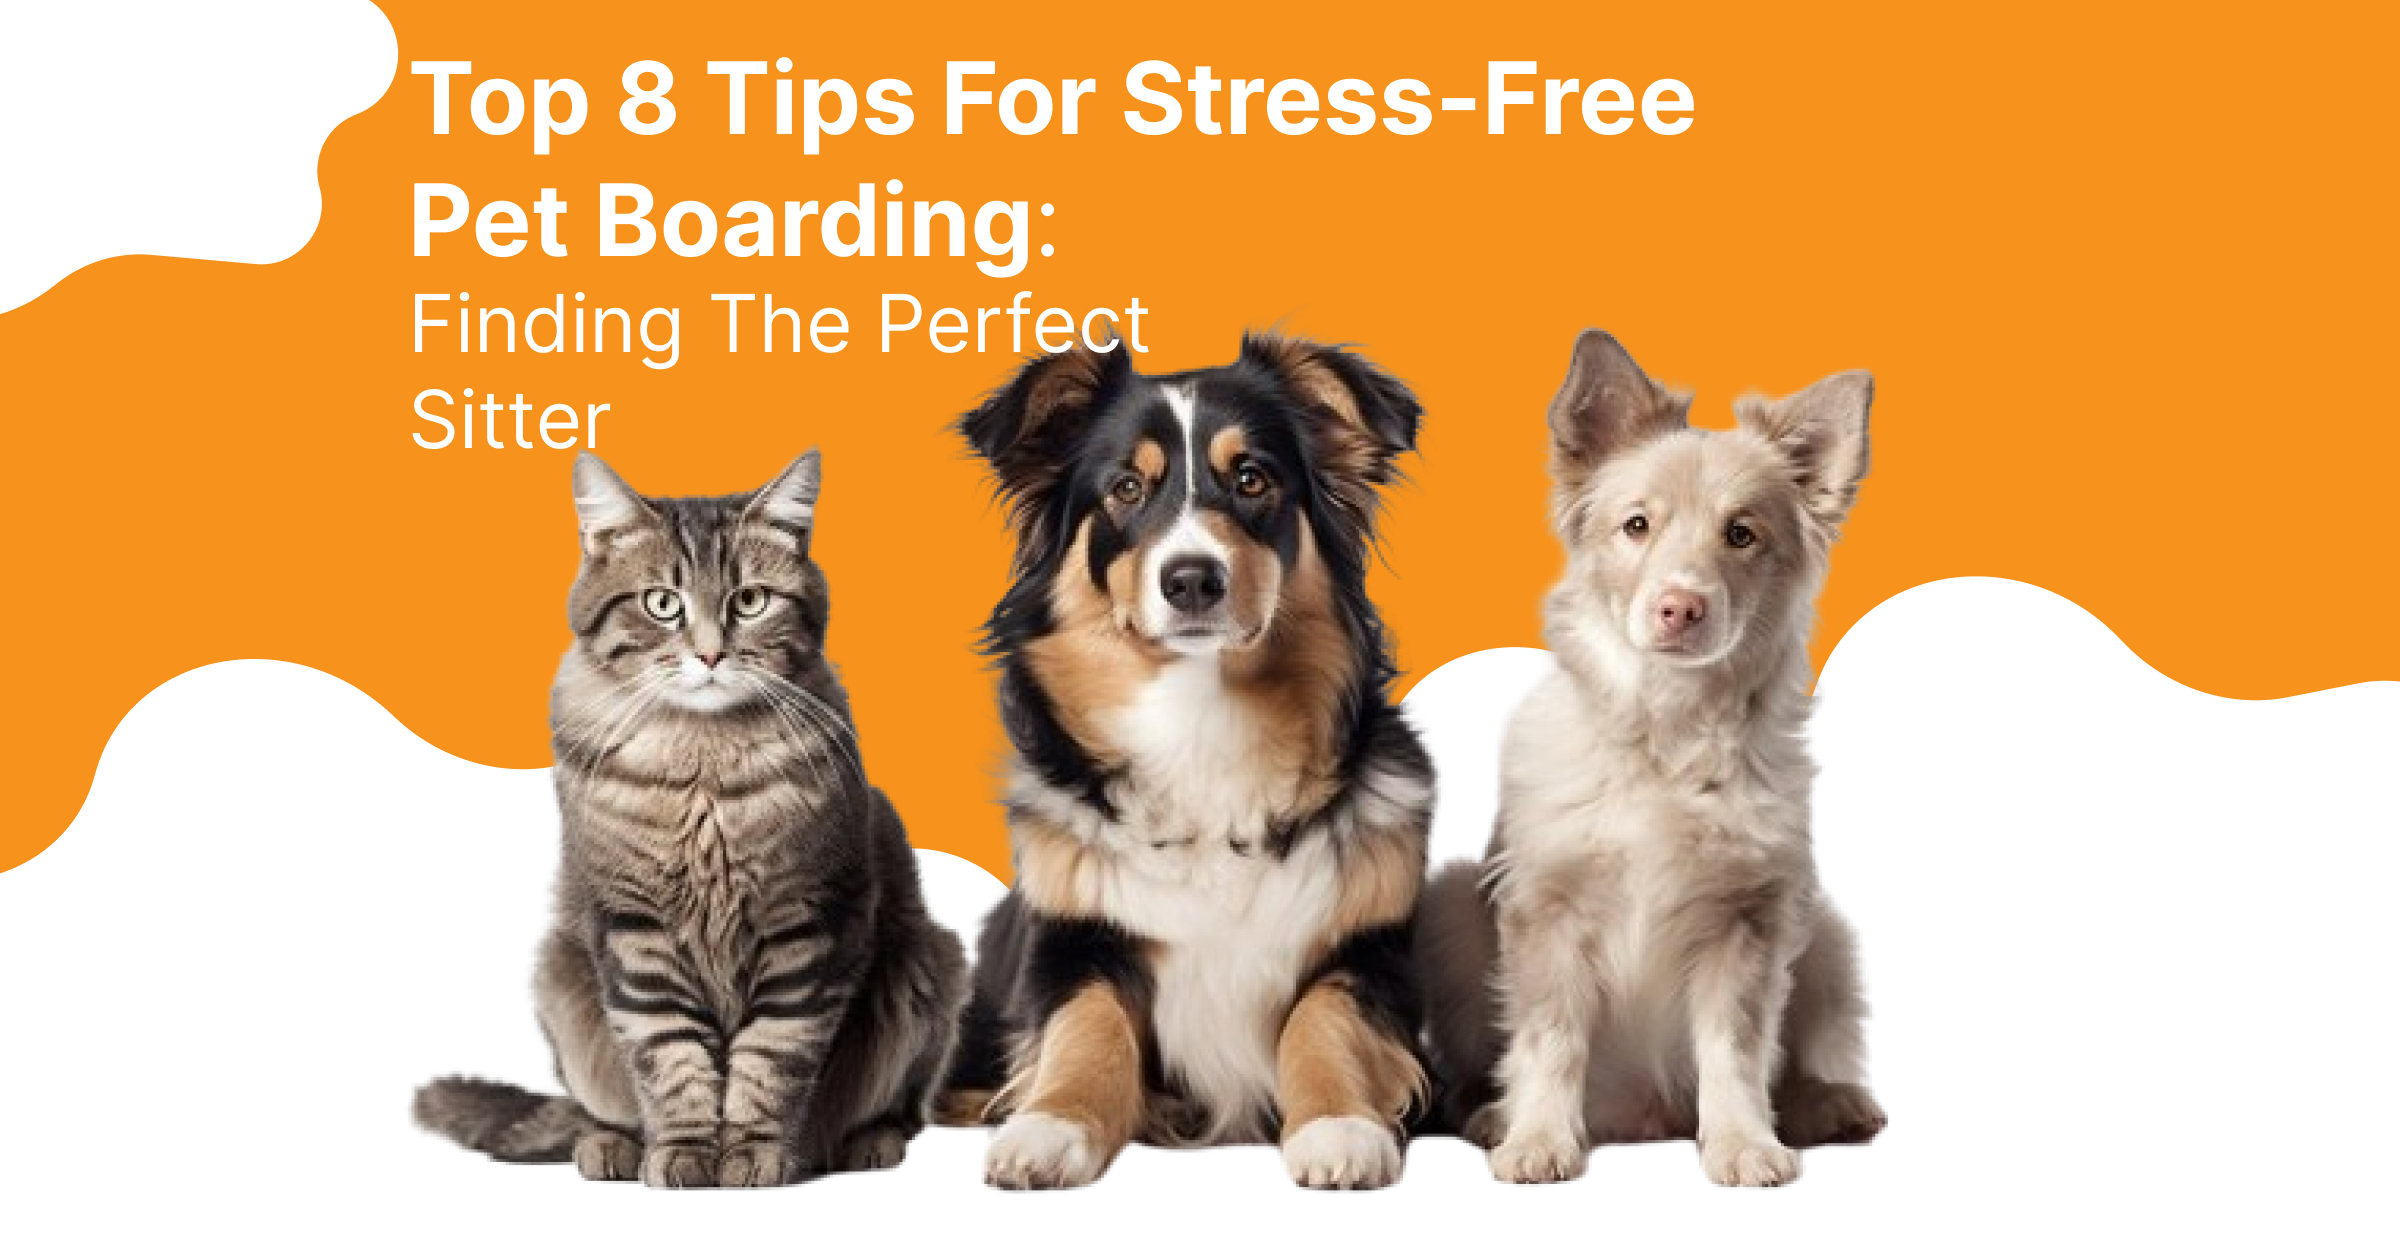 Top 8 Tips For Stress-Free Pet Boarding: Finding The Perfect Sitter